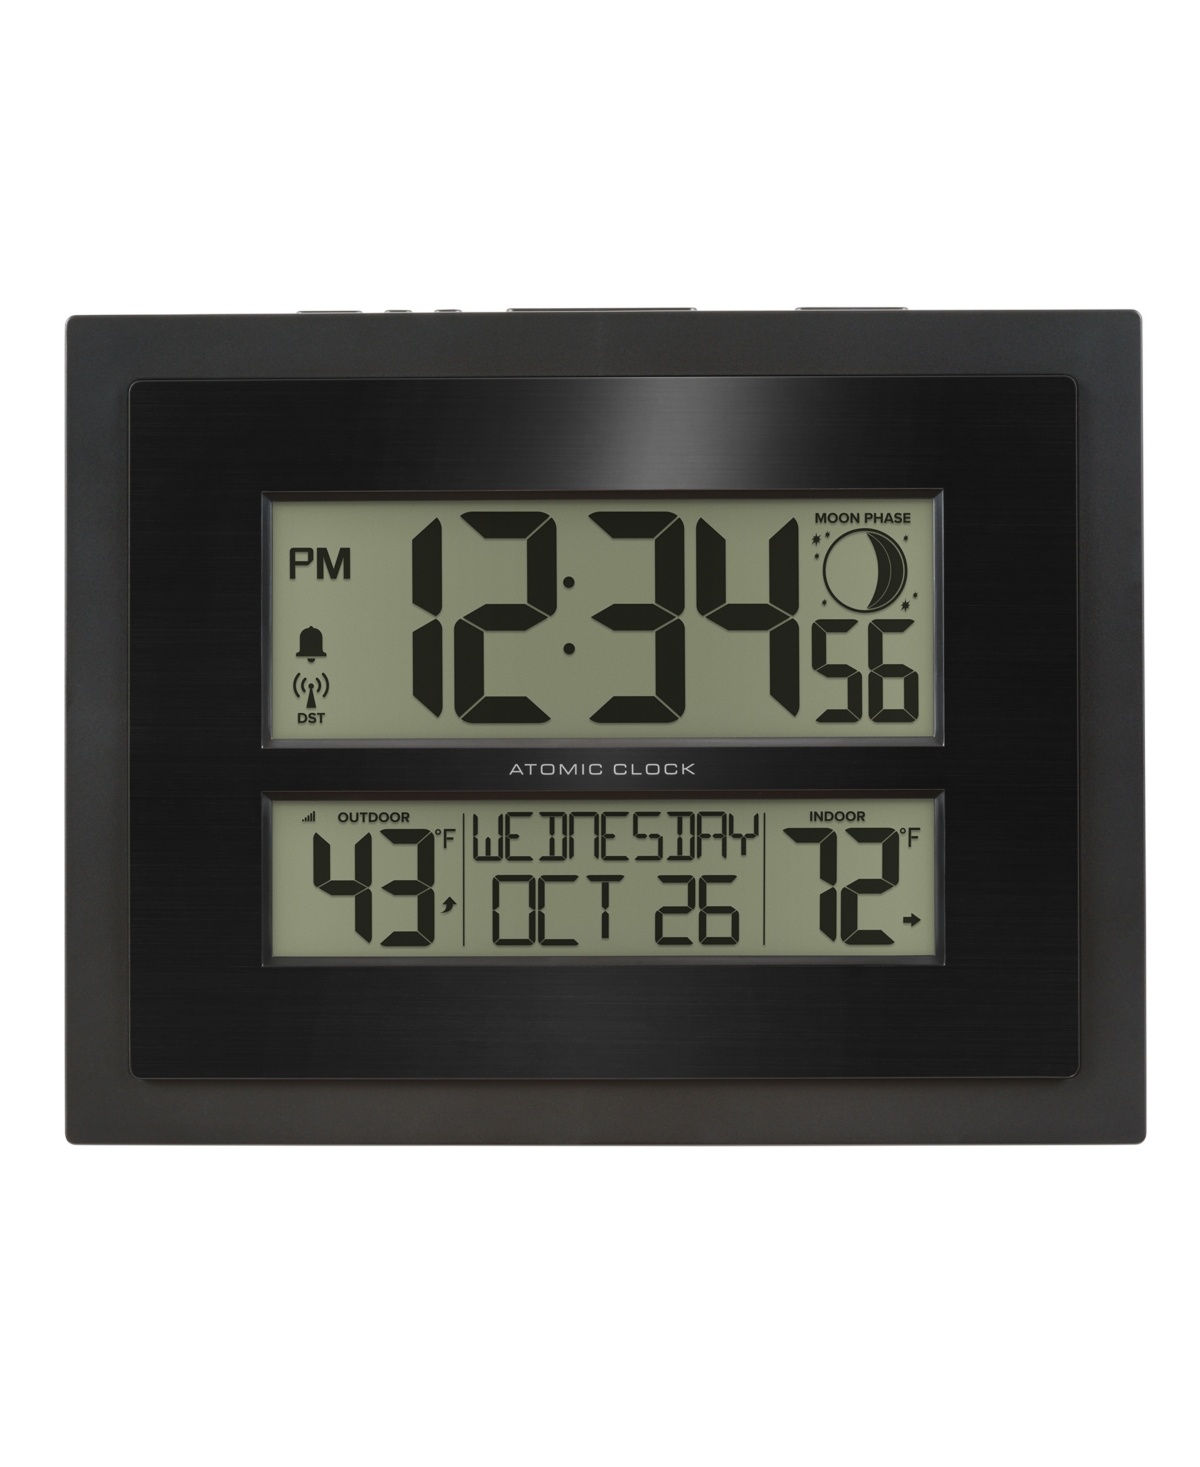 Shop La Crosse Technology 513-75624-int Digital Atomic Clock With Outdoor Temperature With Moon Phase In Black